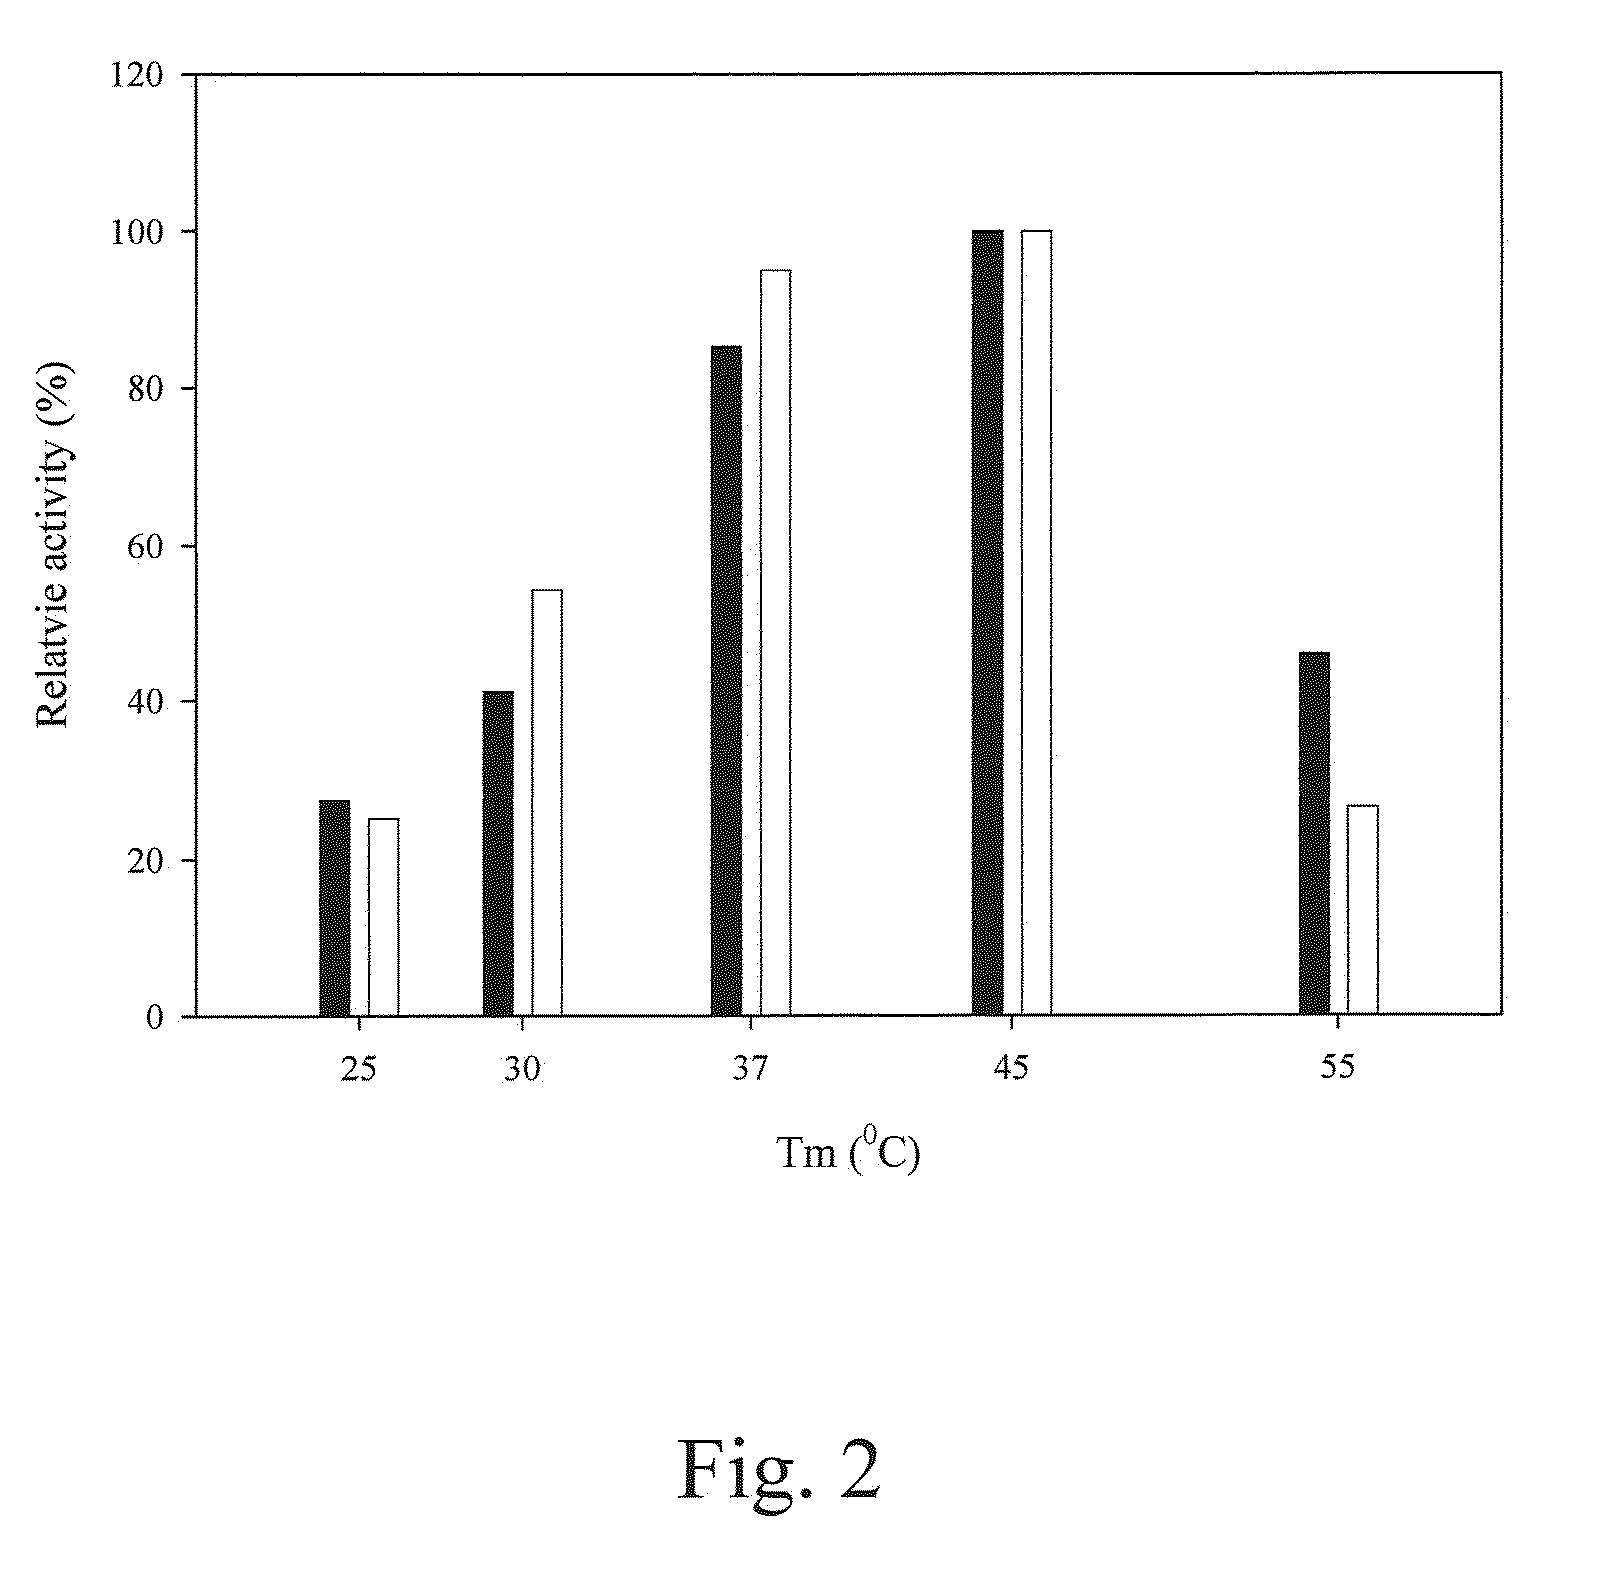 Protein Having Prolyl Oligopeptidase Activity, Nucleic Acid Encoding Same and Method for Producing and Using Same